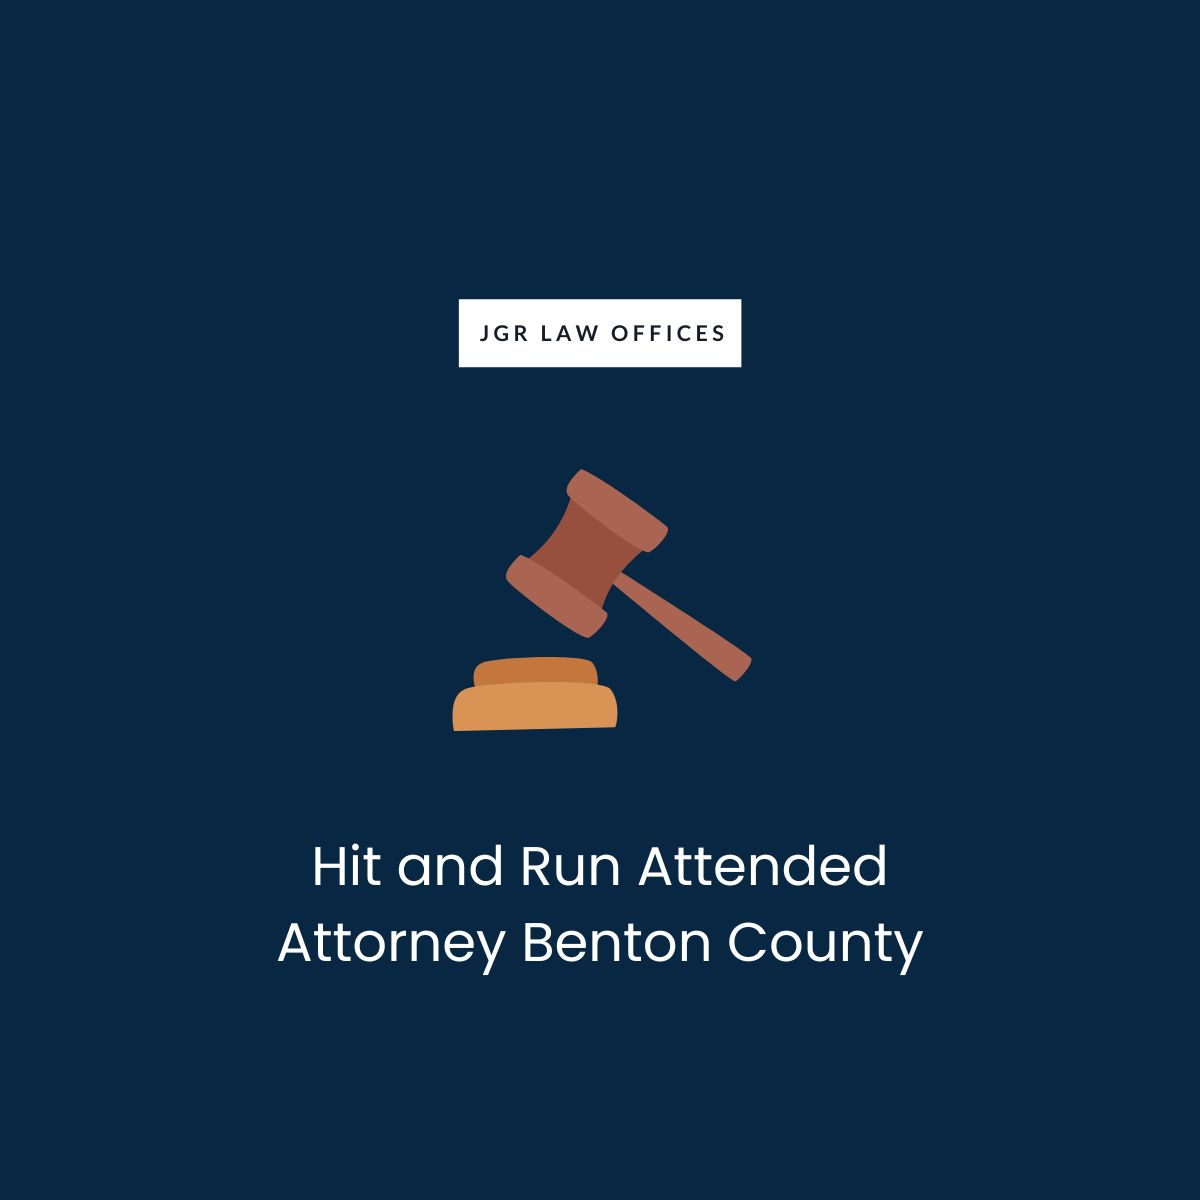 Hit and Run Attended Attorney Benton County